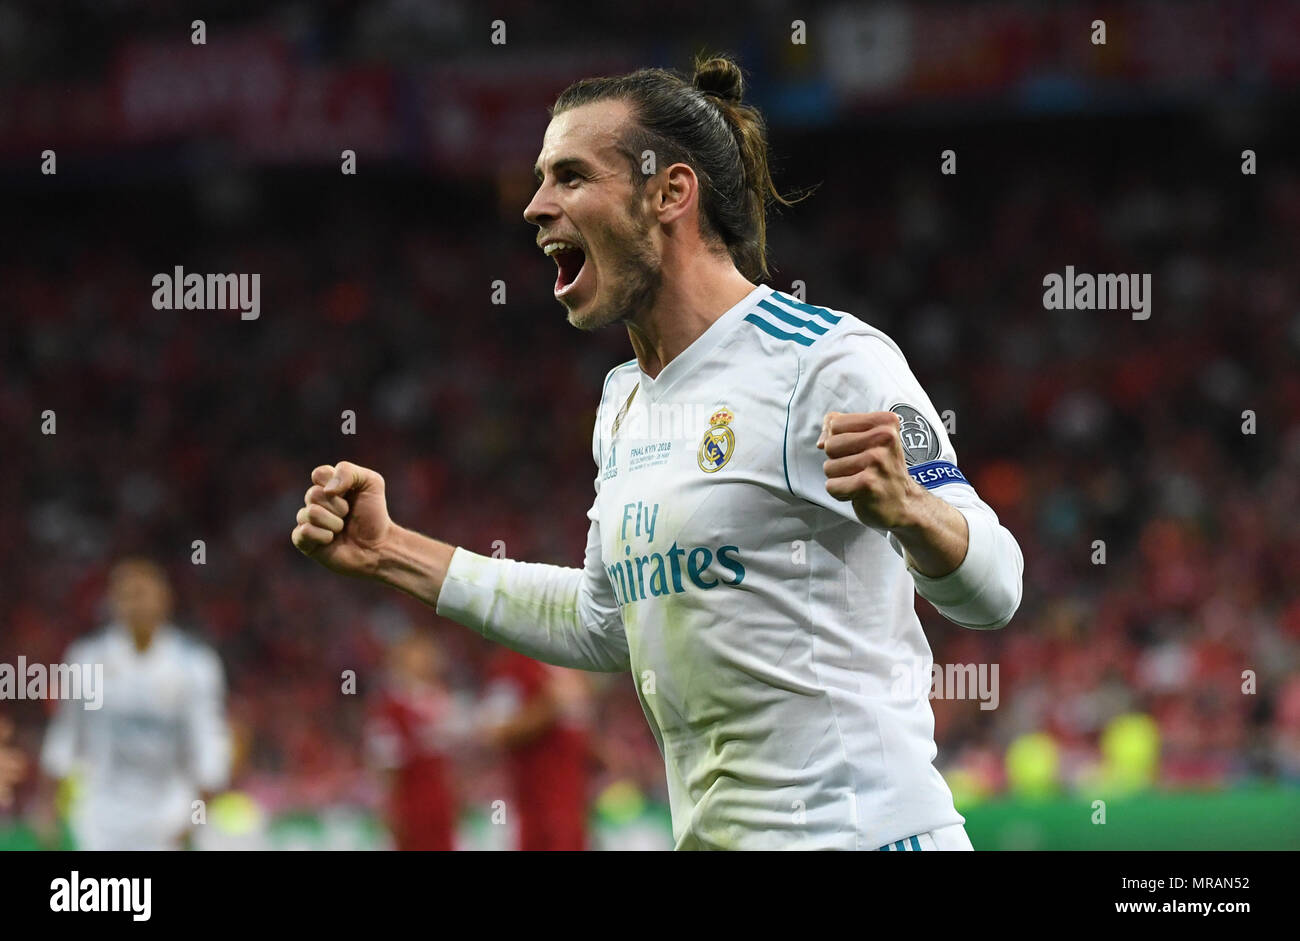 26 May 2018, Ukraine, Kiev: soccer, Champions League, Real Madrid vs FC Liverpool, finals at the Olimpiyskiy National Sports Complex. Madrid's Gareth Bale celebrates his 3-1 goal. Photo: Ina Fassbender/dpa Credit: dpa picture alliance/Alamy Live News Stock Photo